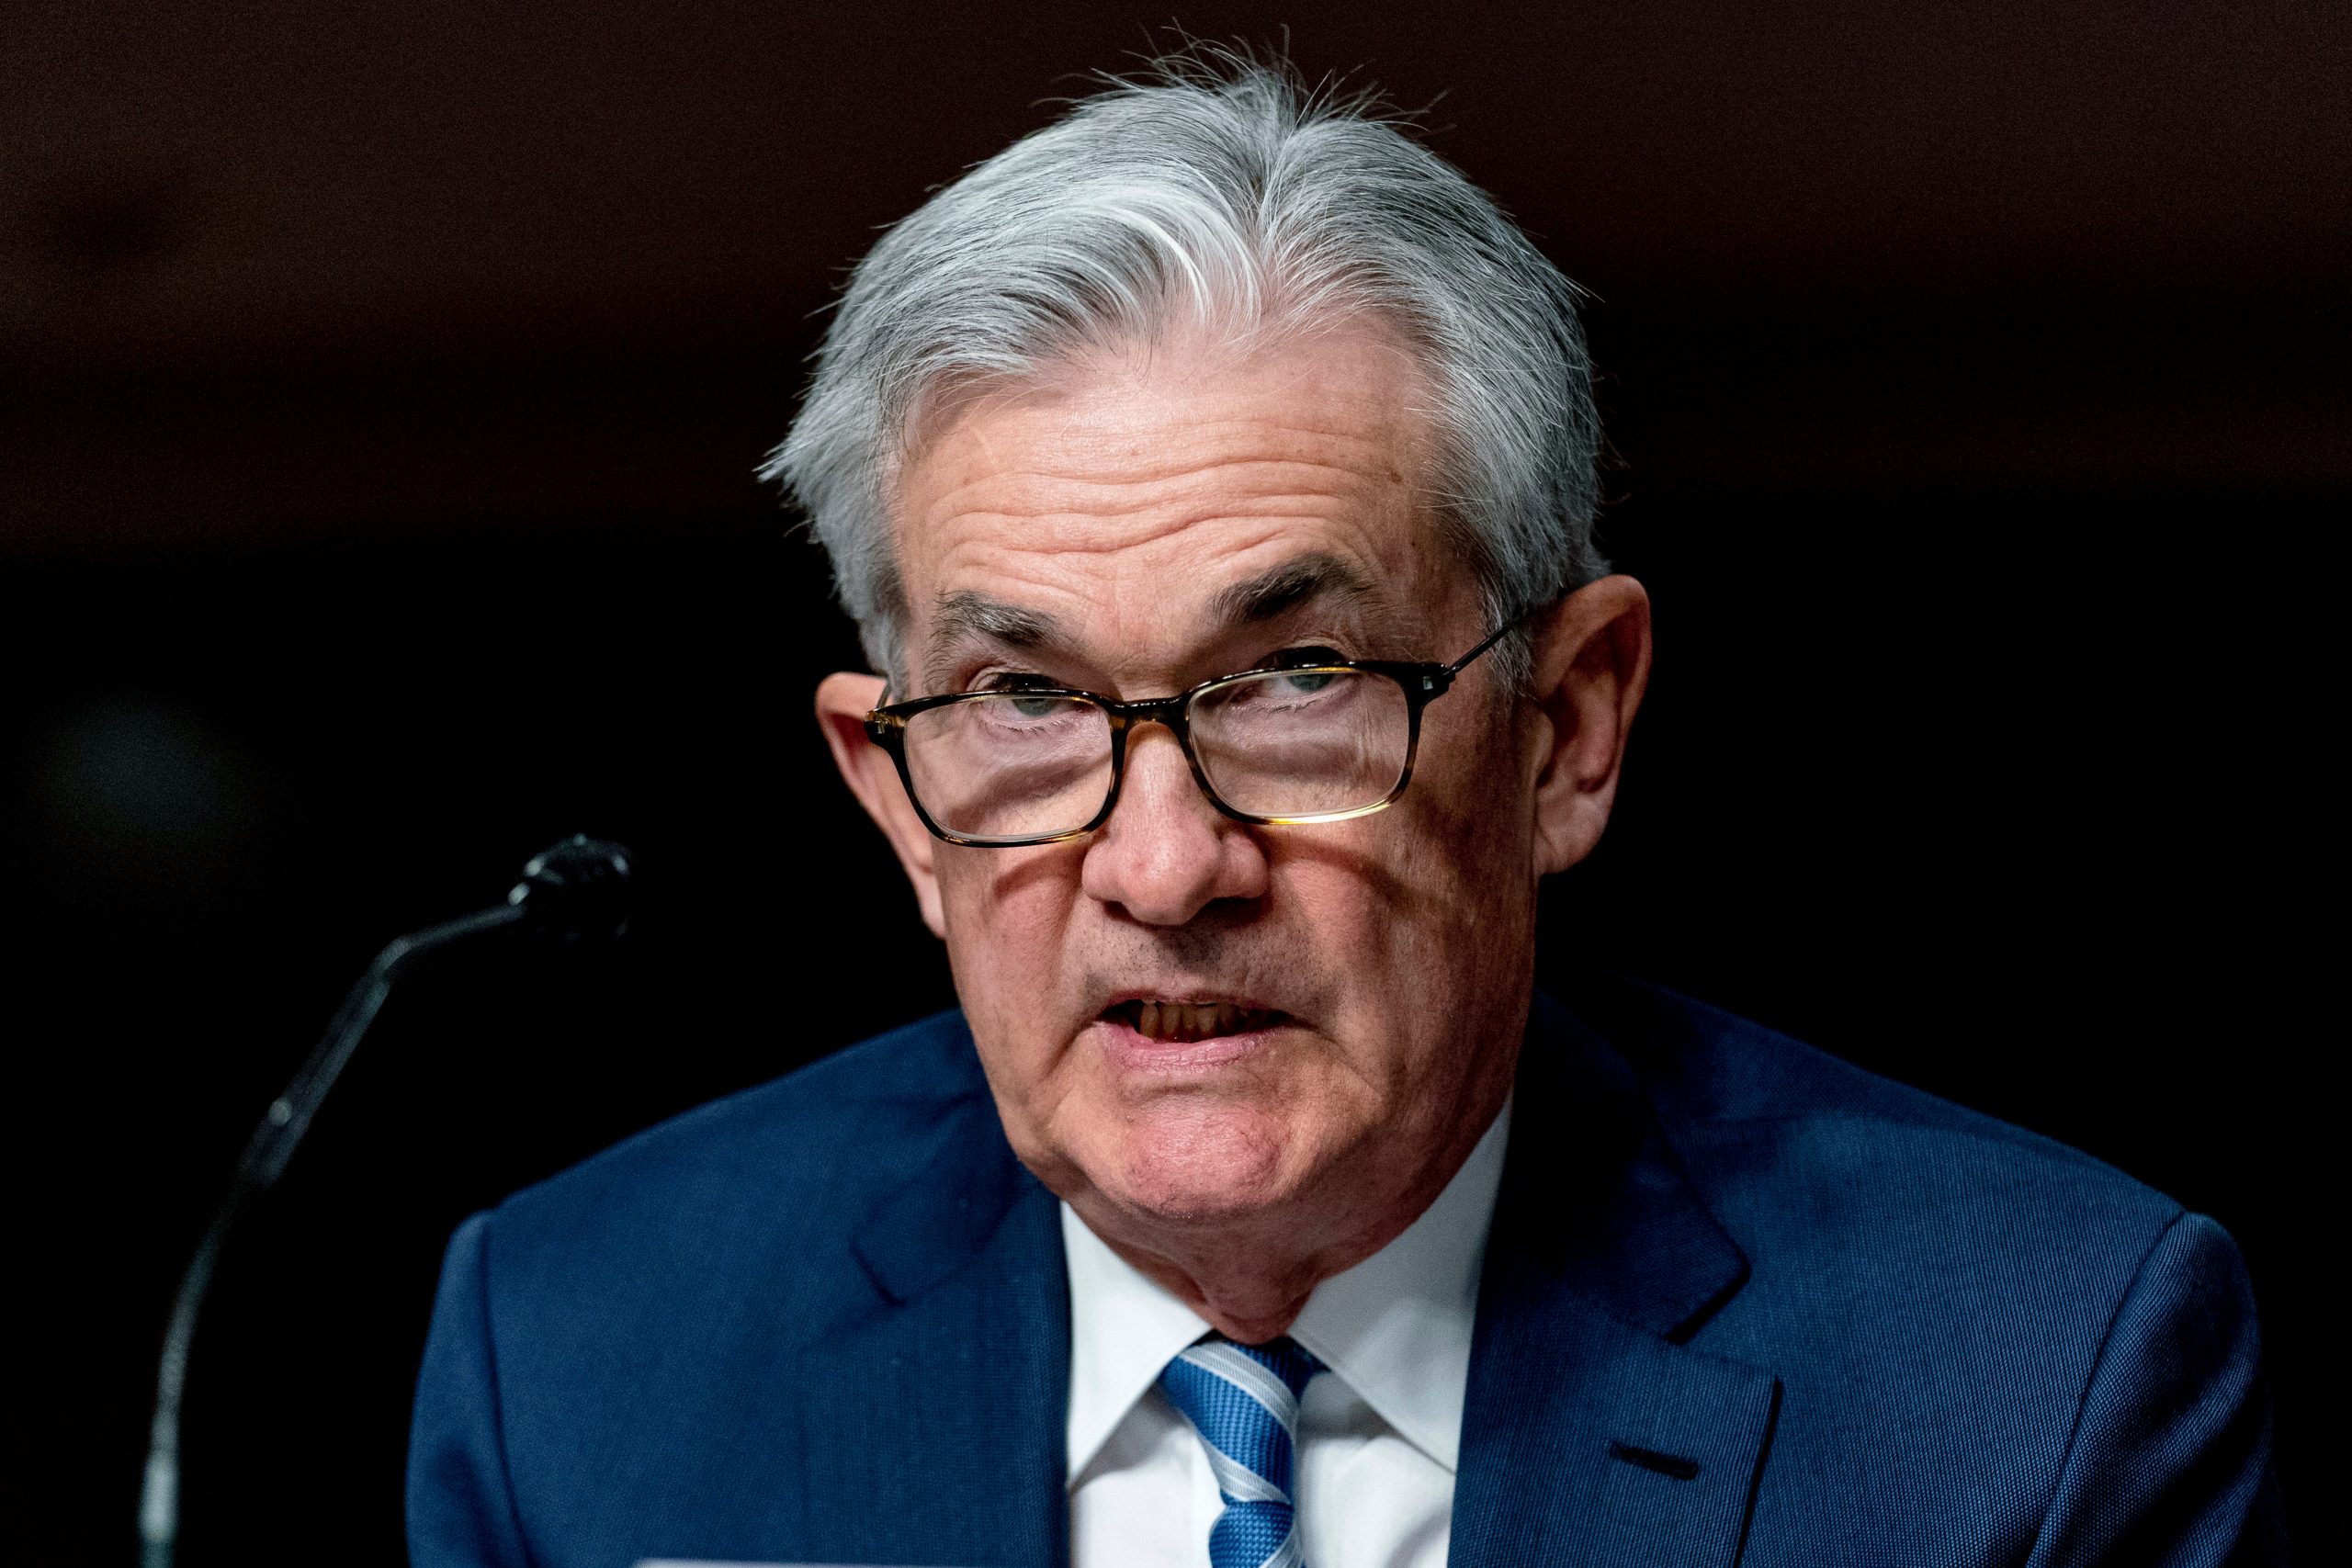 Fed’s Jerome Powell: Inflation poses a major threat to job market